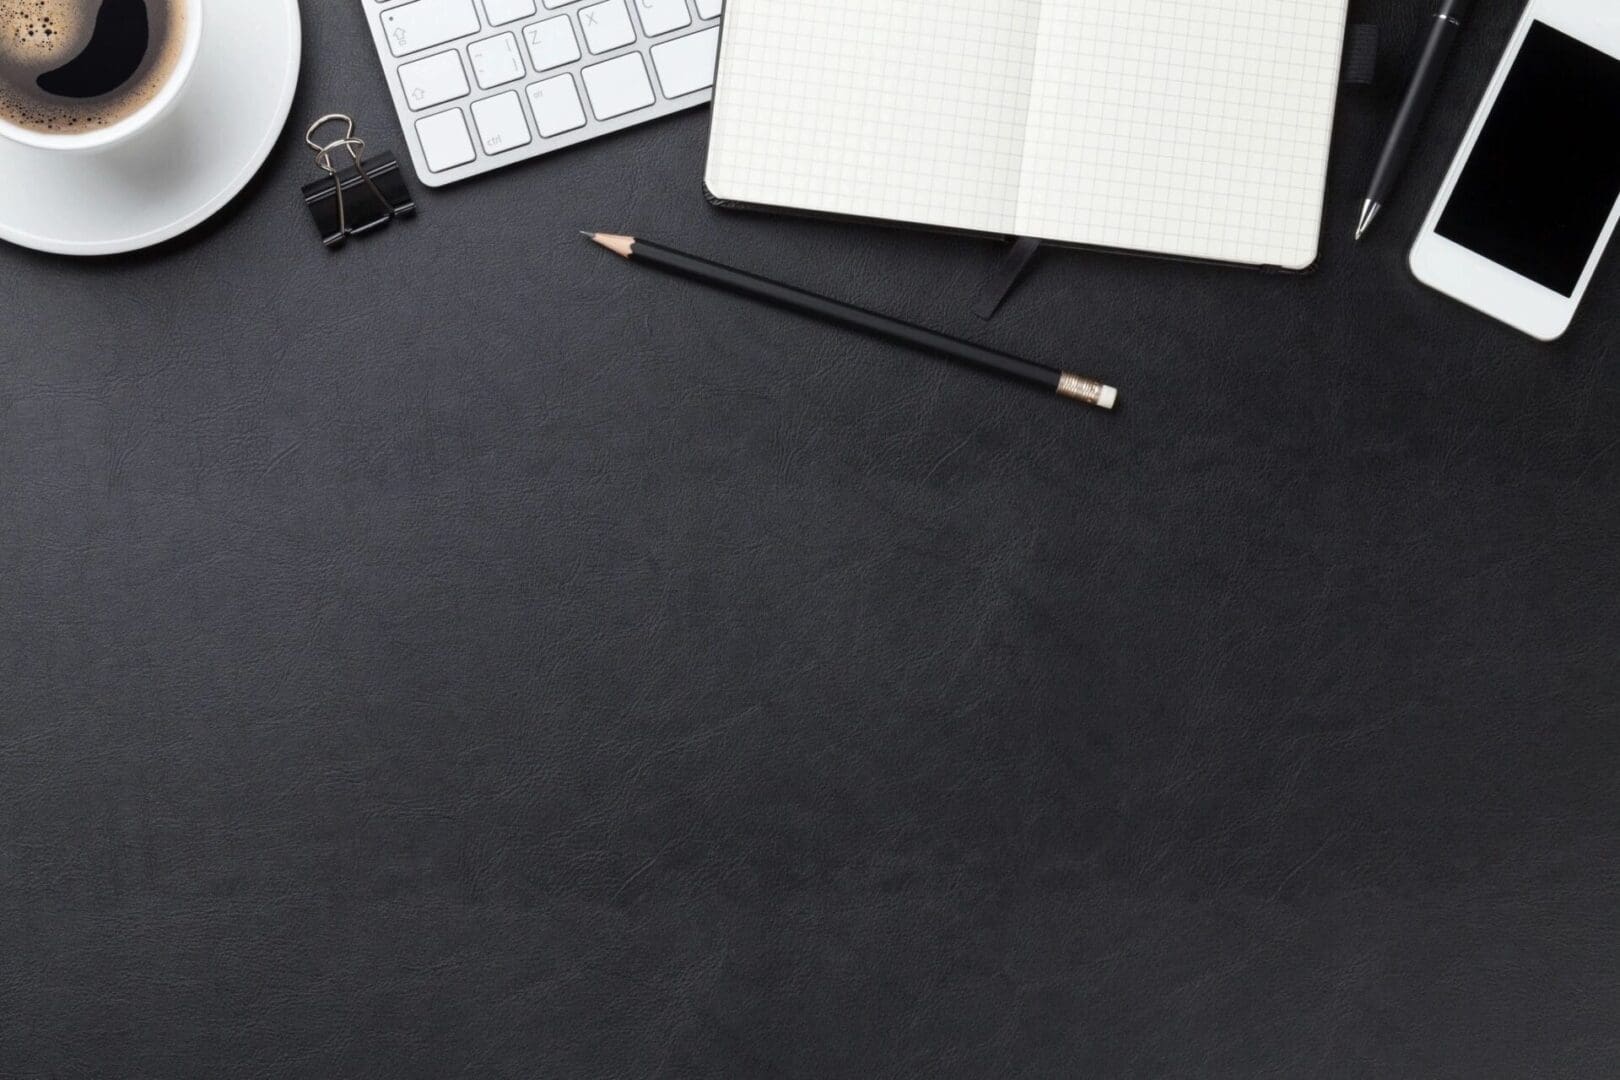 Top view of a black desk with a cup of coffee and a notebook.